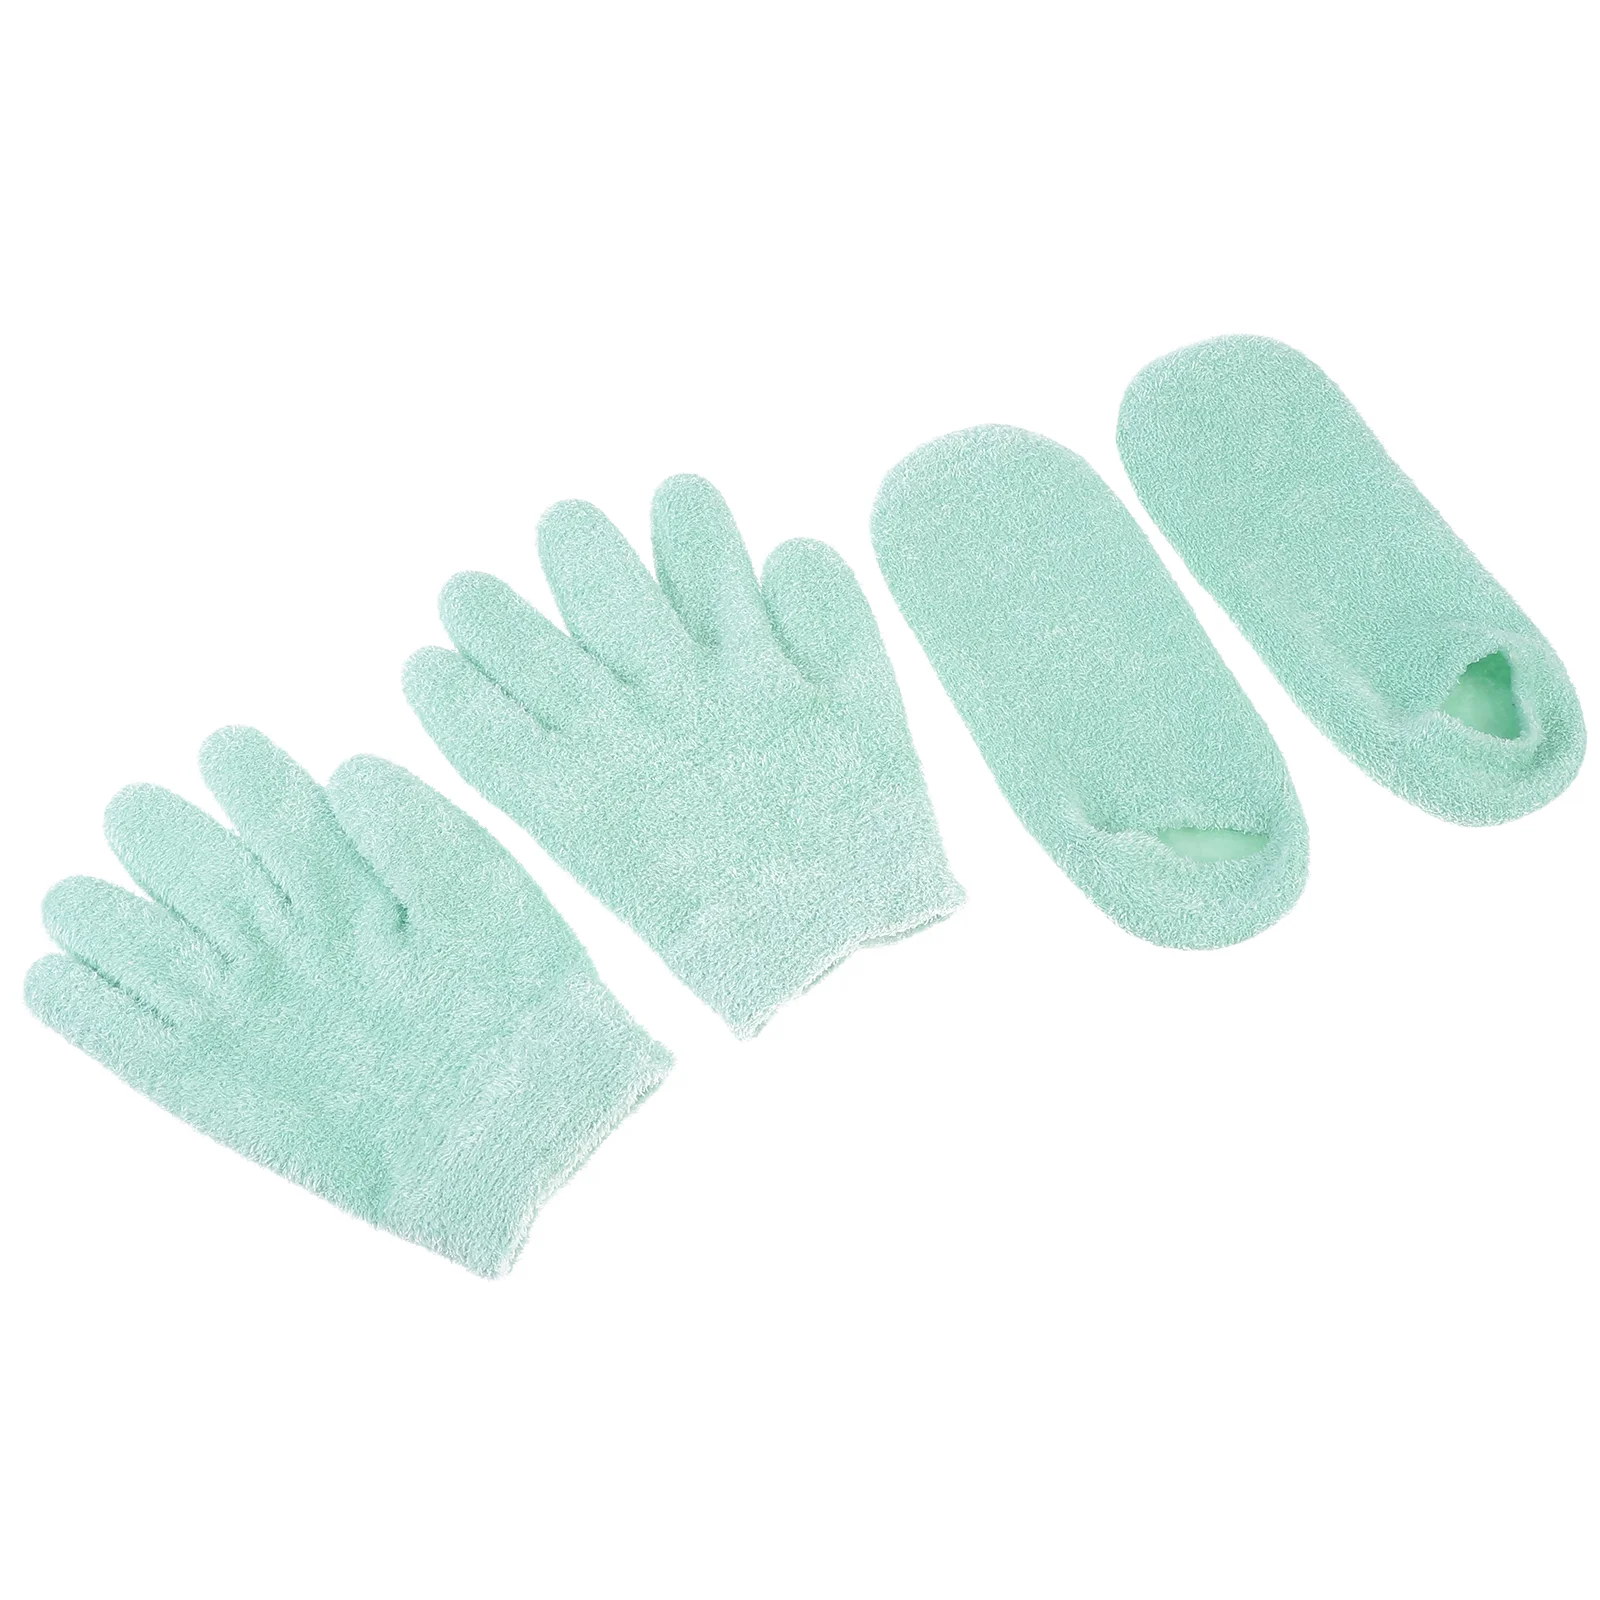 

4Pcs Dry Cracked Hands Moisturizing Gel Gloves and Foot Treatment Spa Socks